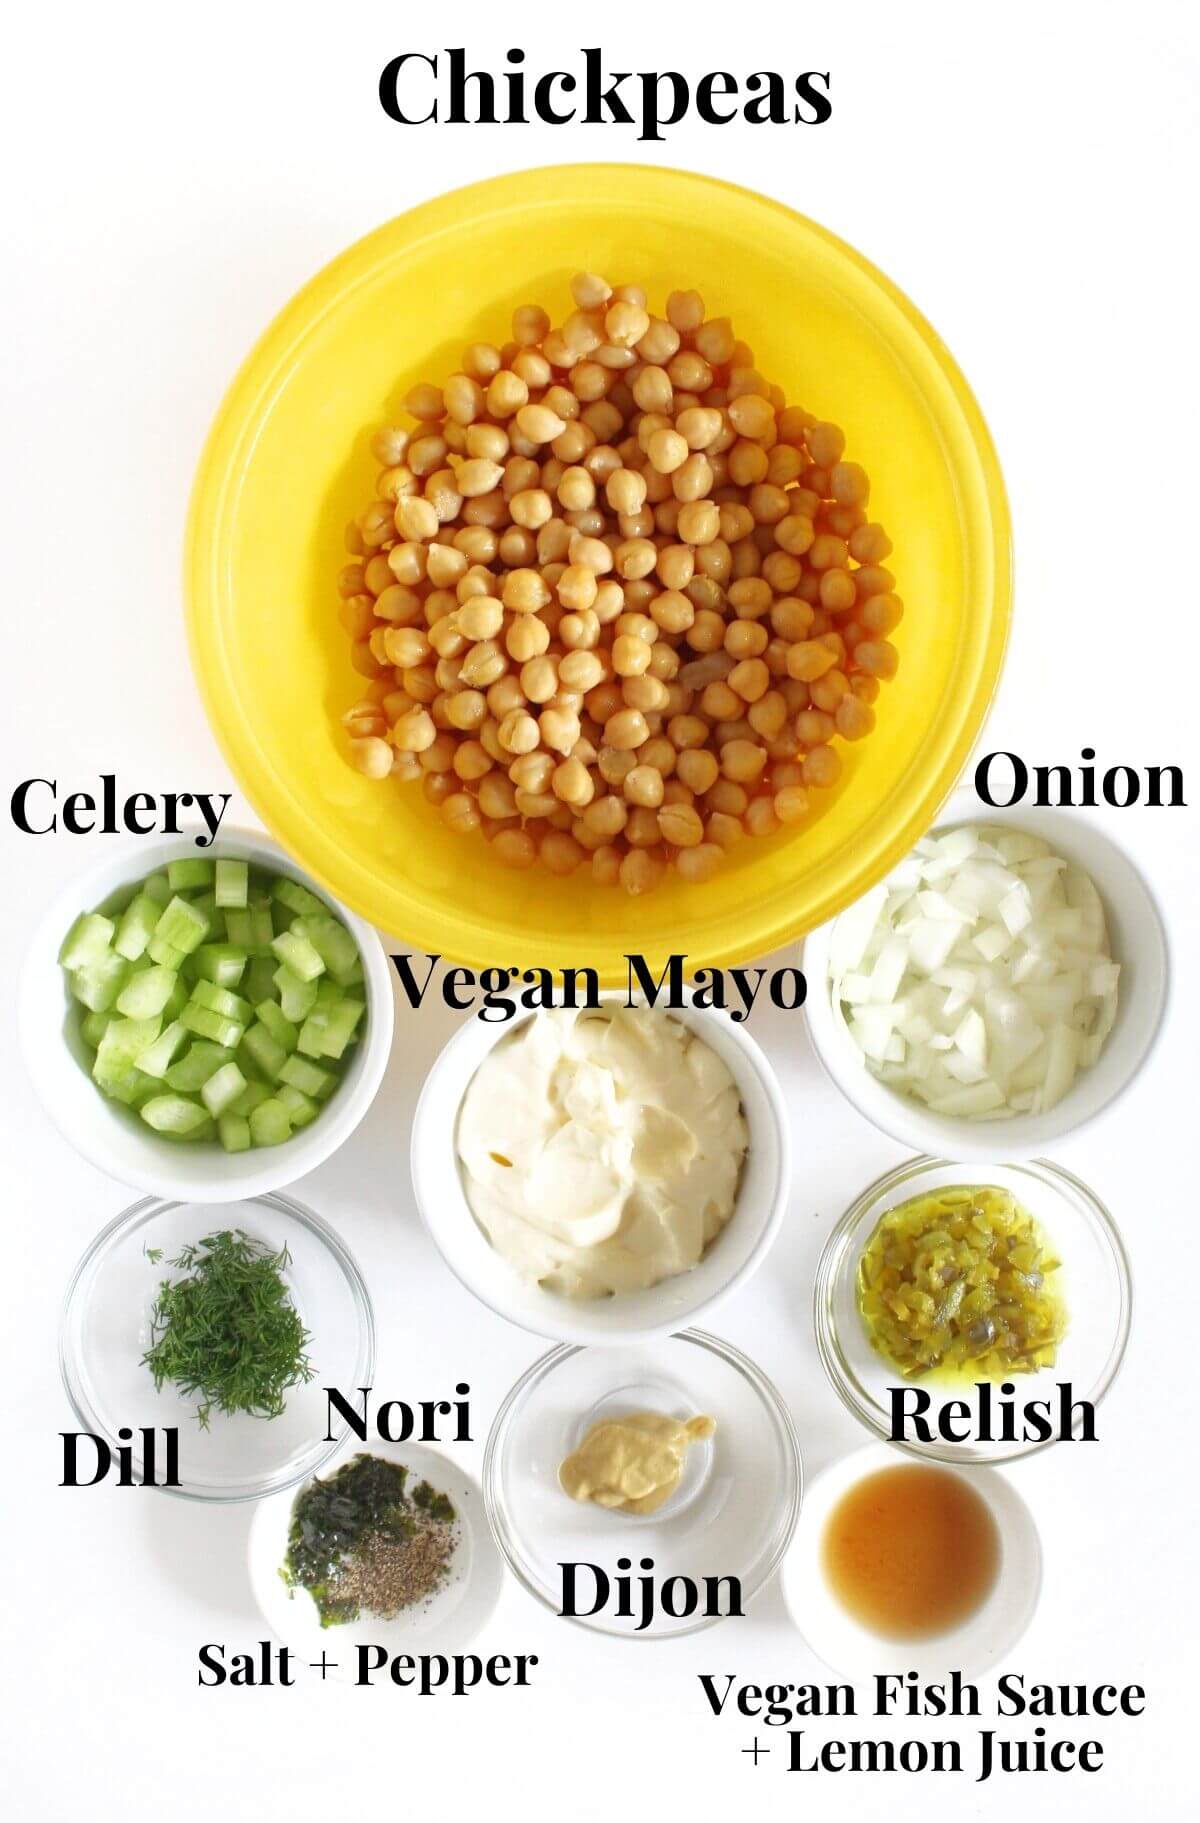 ingredients for vegan tuna salad with chickpeas.